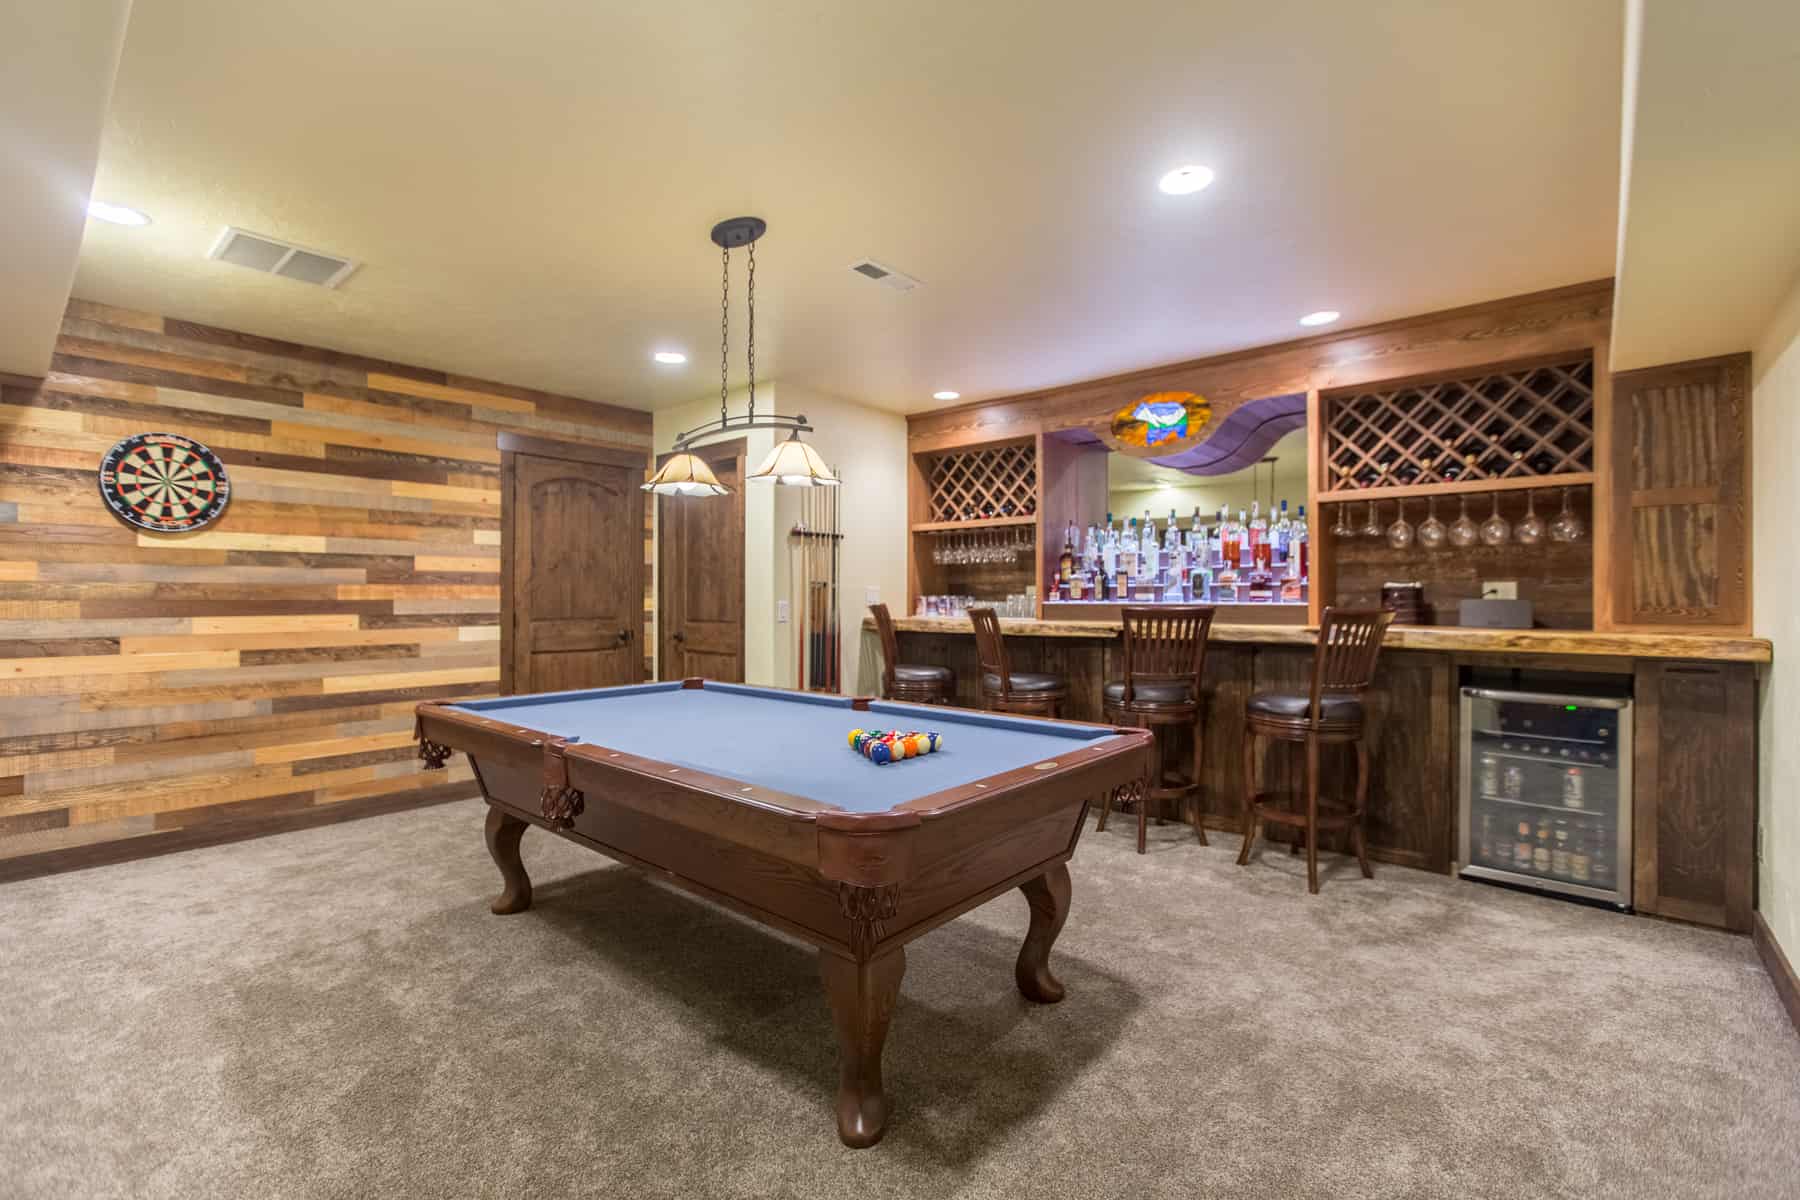 9 Recreation Room With Pool Table And Bar Max Elman 10